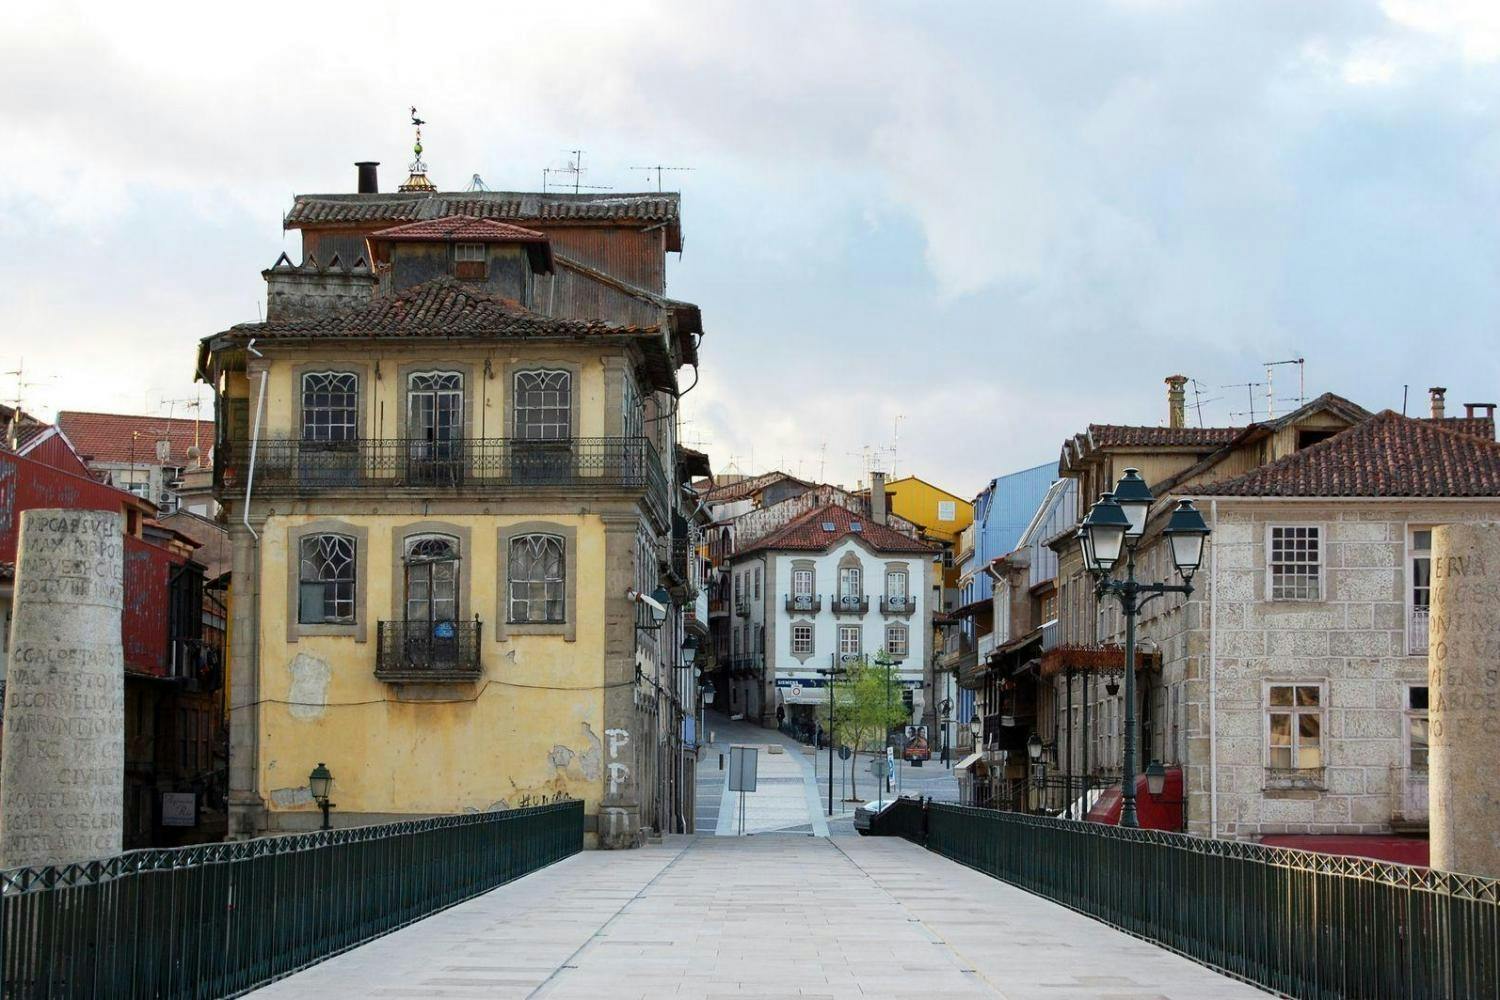 Stroll the picturesque streets of Northern Portugal for a localized experience